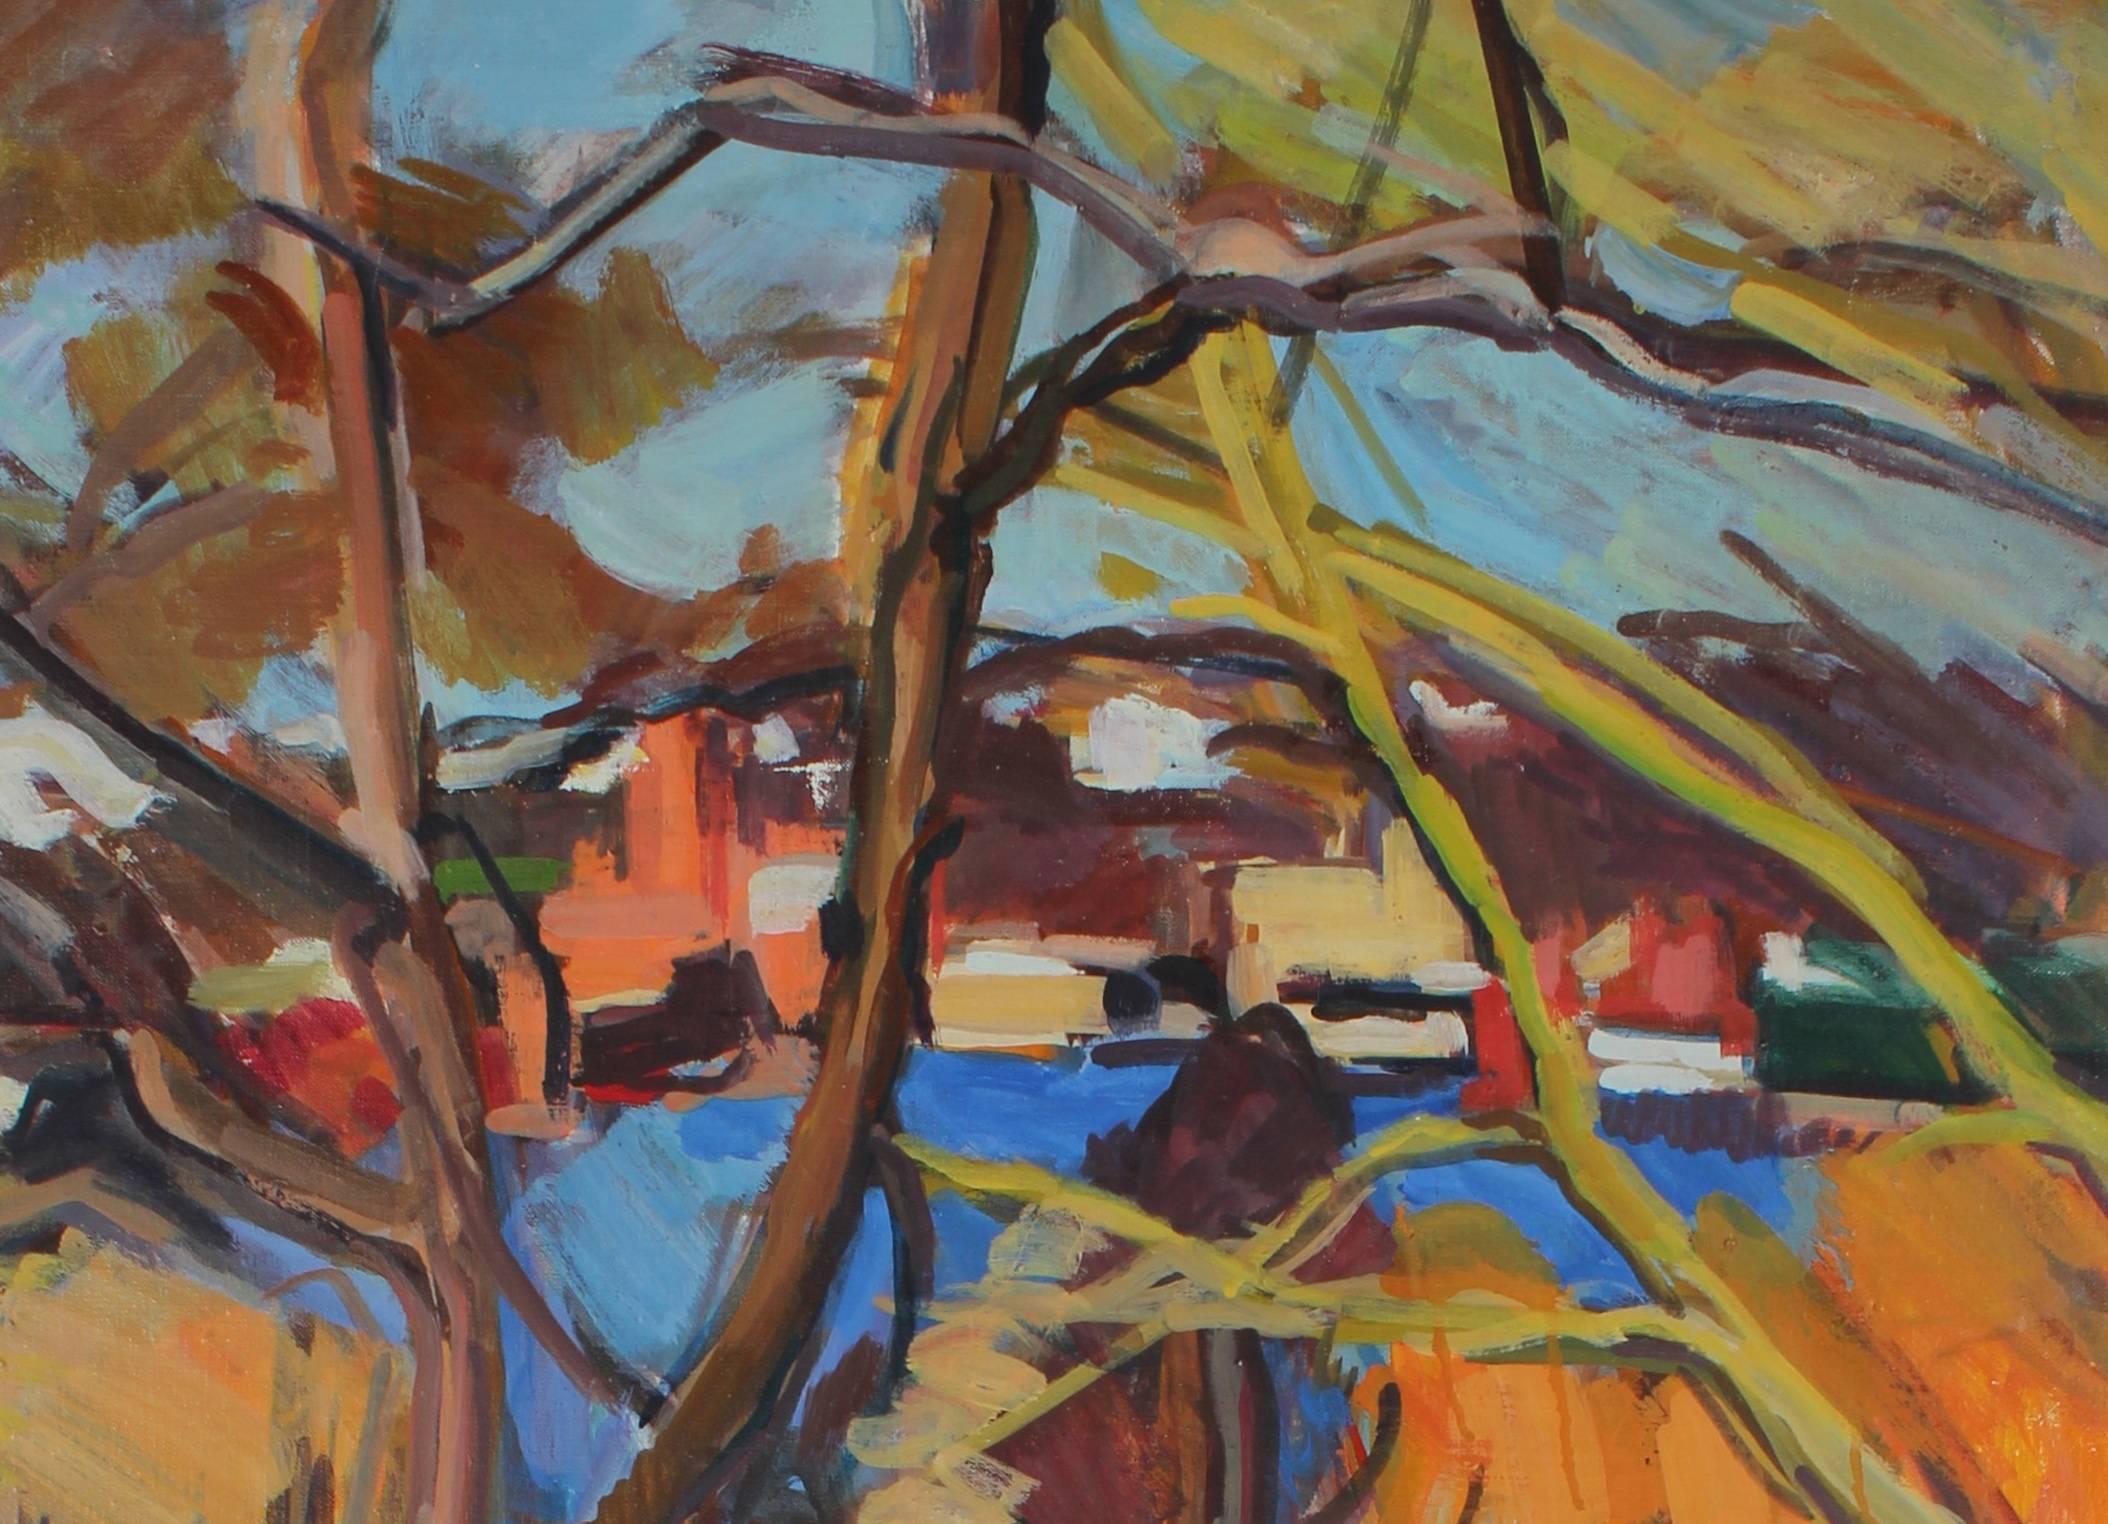 Bright 20th Century Landscape - Painting by Hearne Pardee/ Gina Werfel